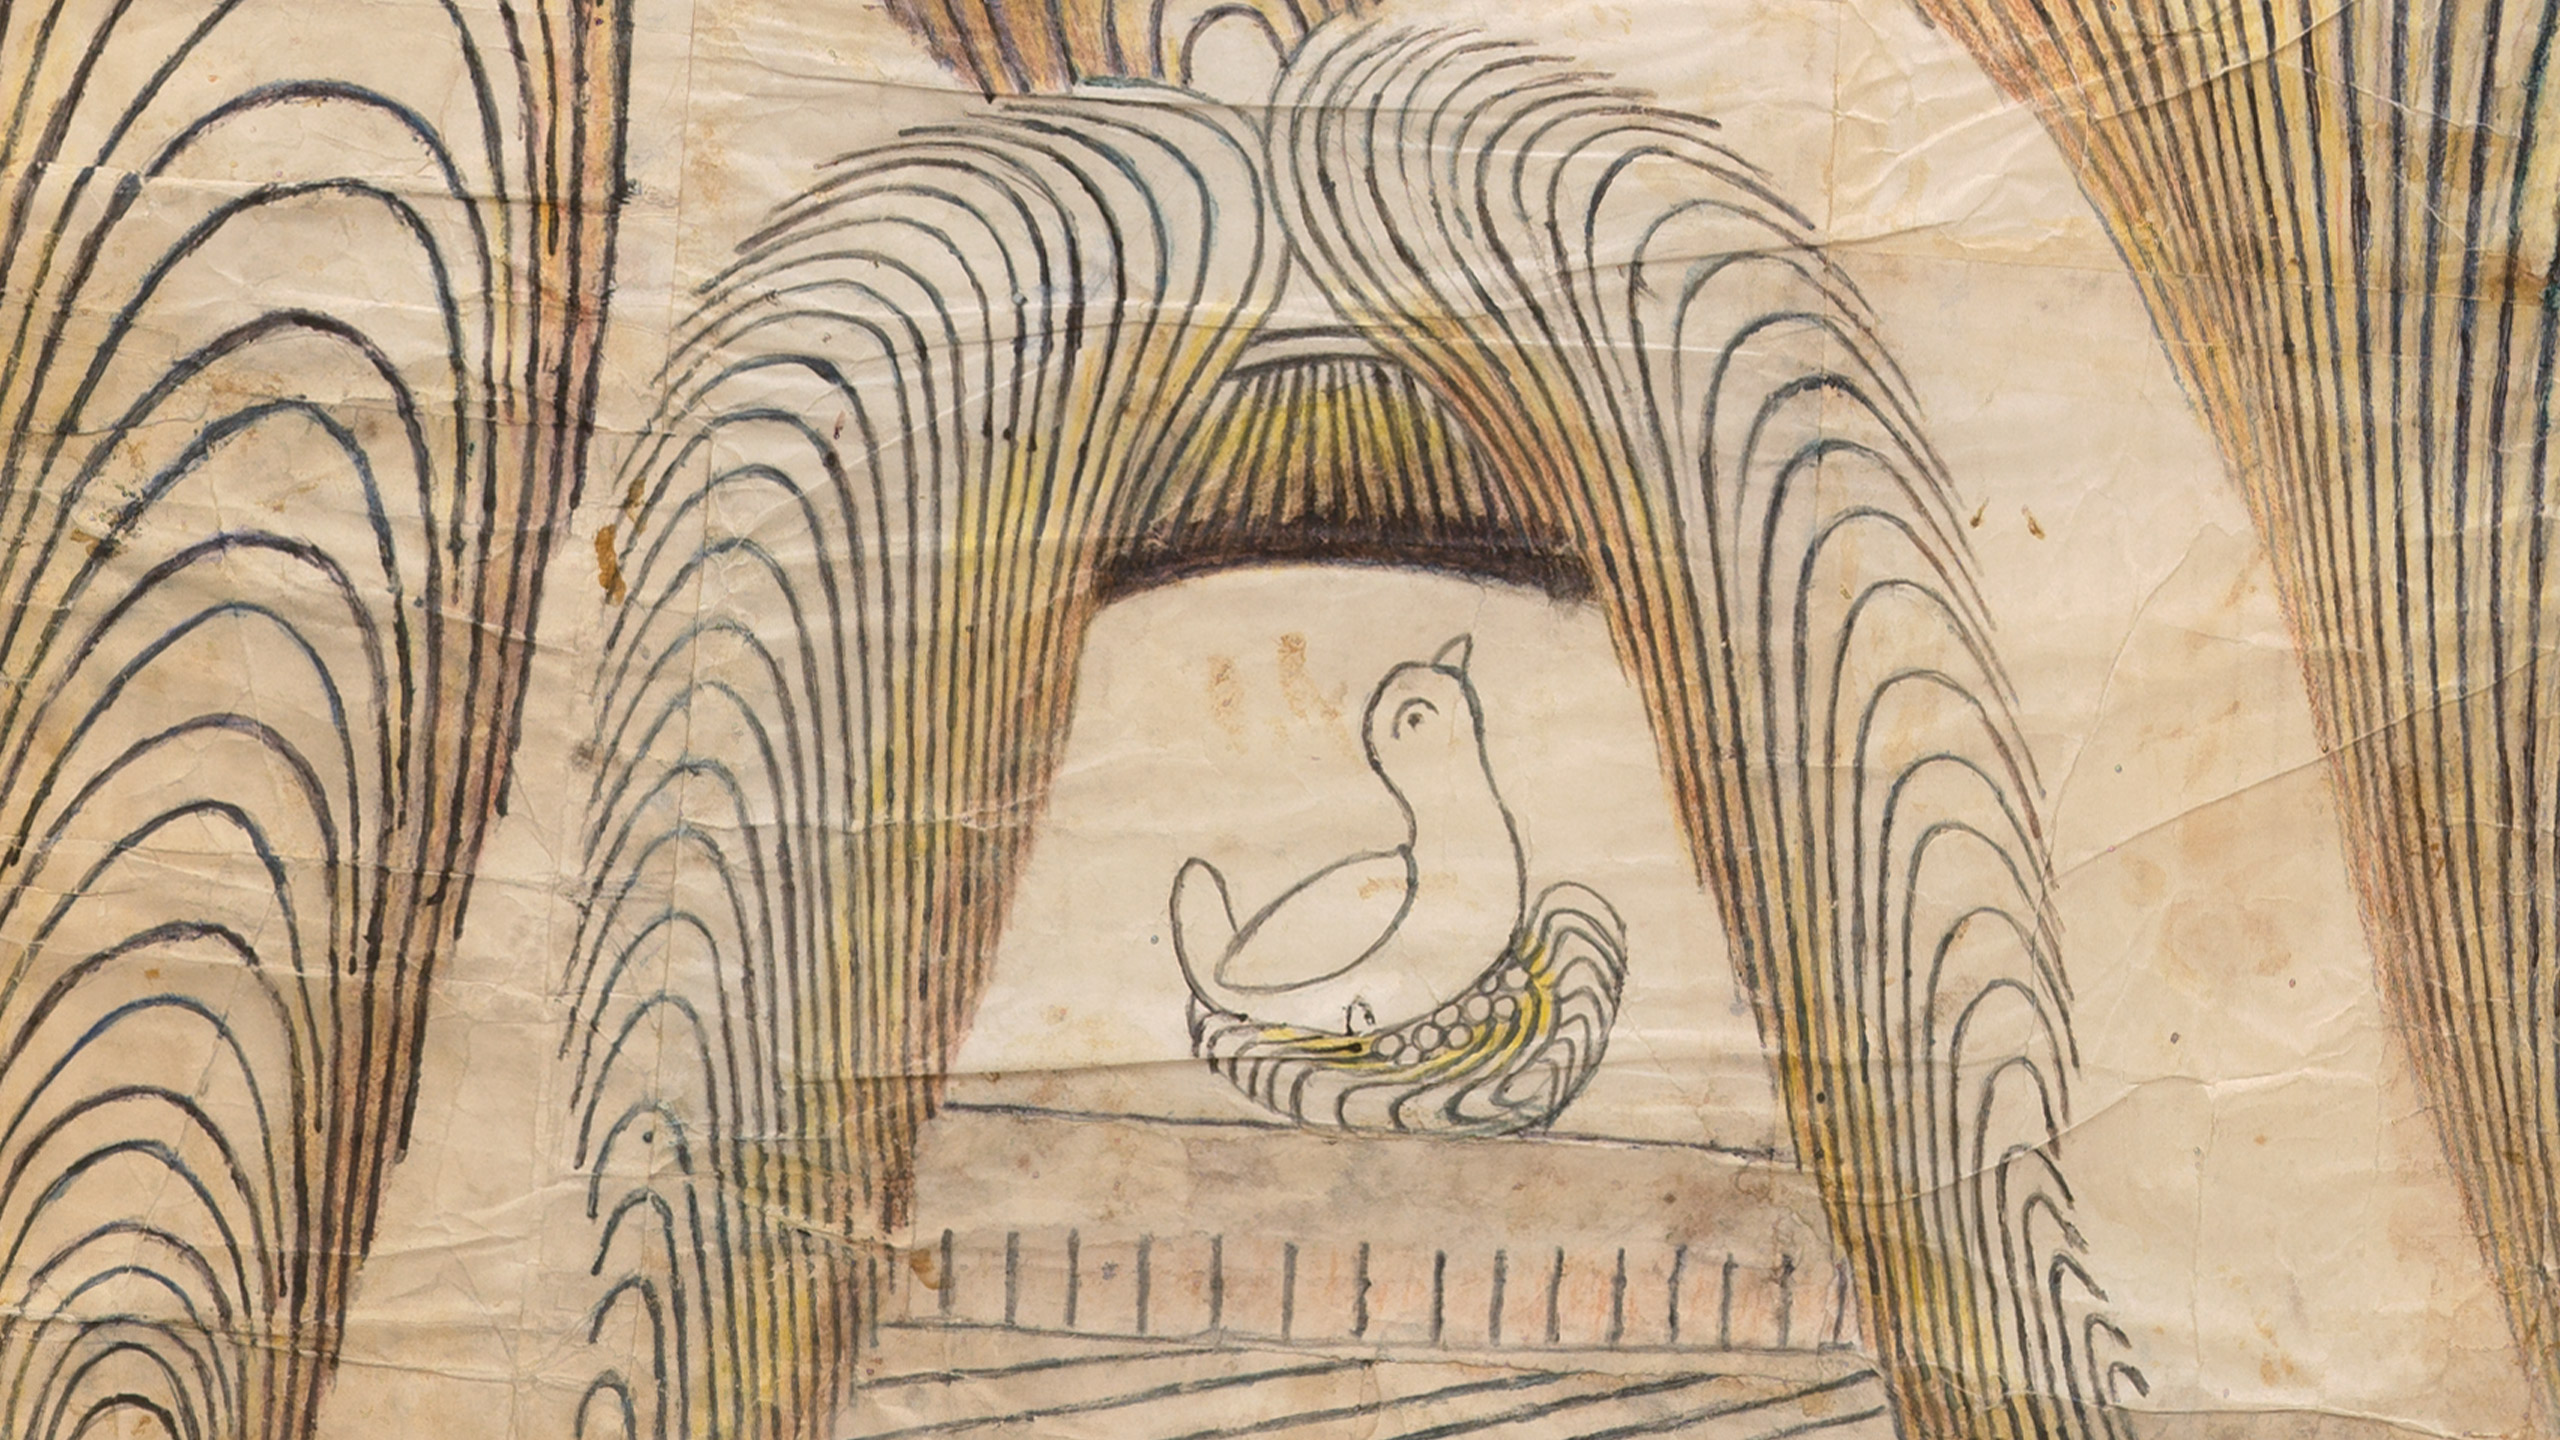 A detail from an untitled work features Cat, Bird, and Tunnels by  Martin Ramirez dated 1950